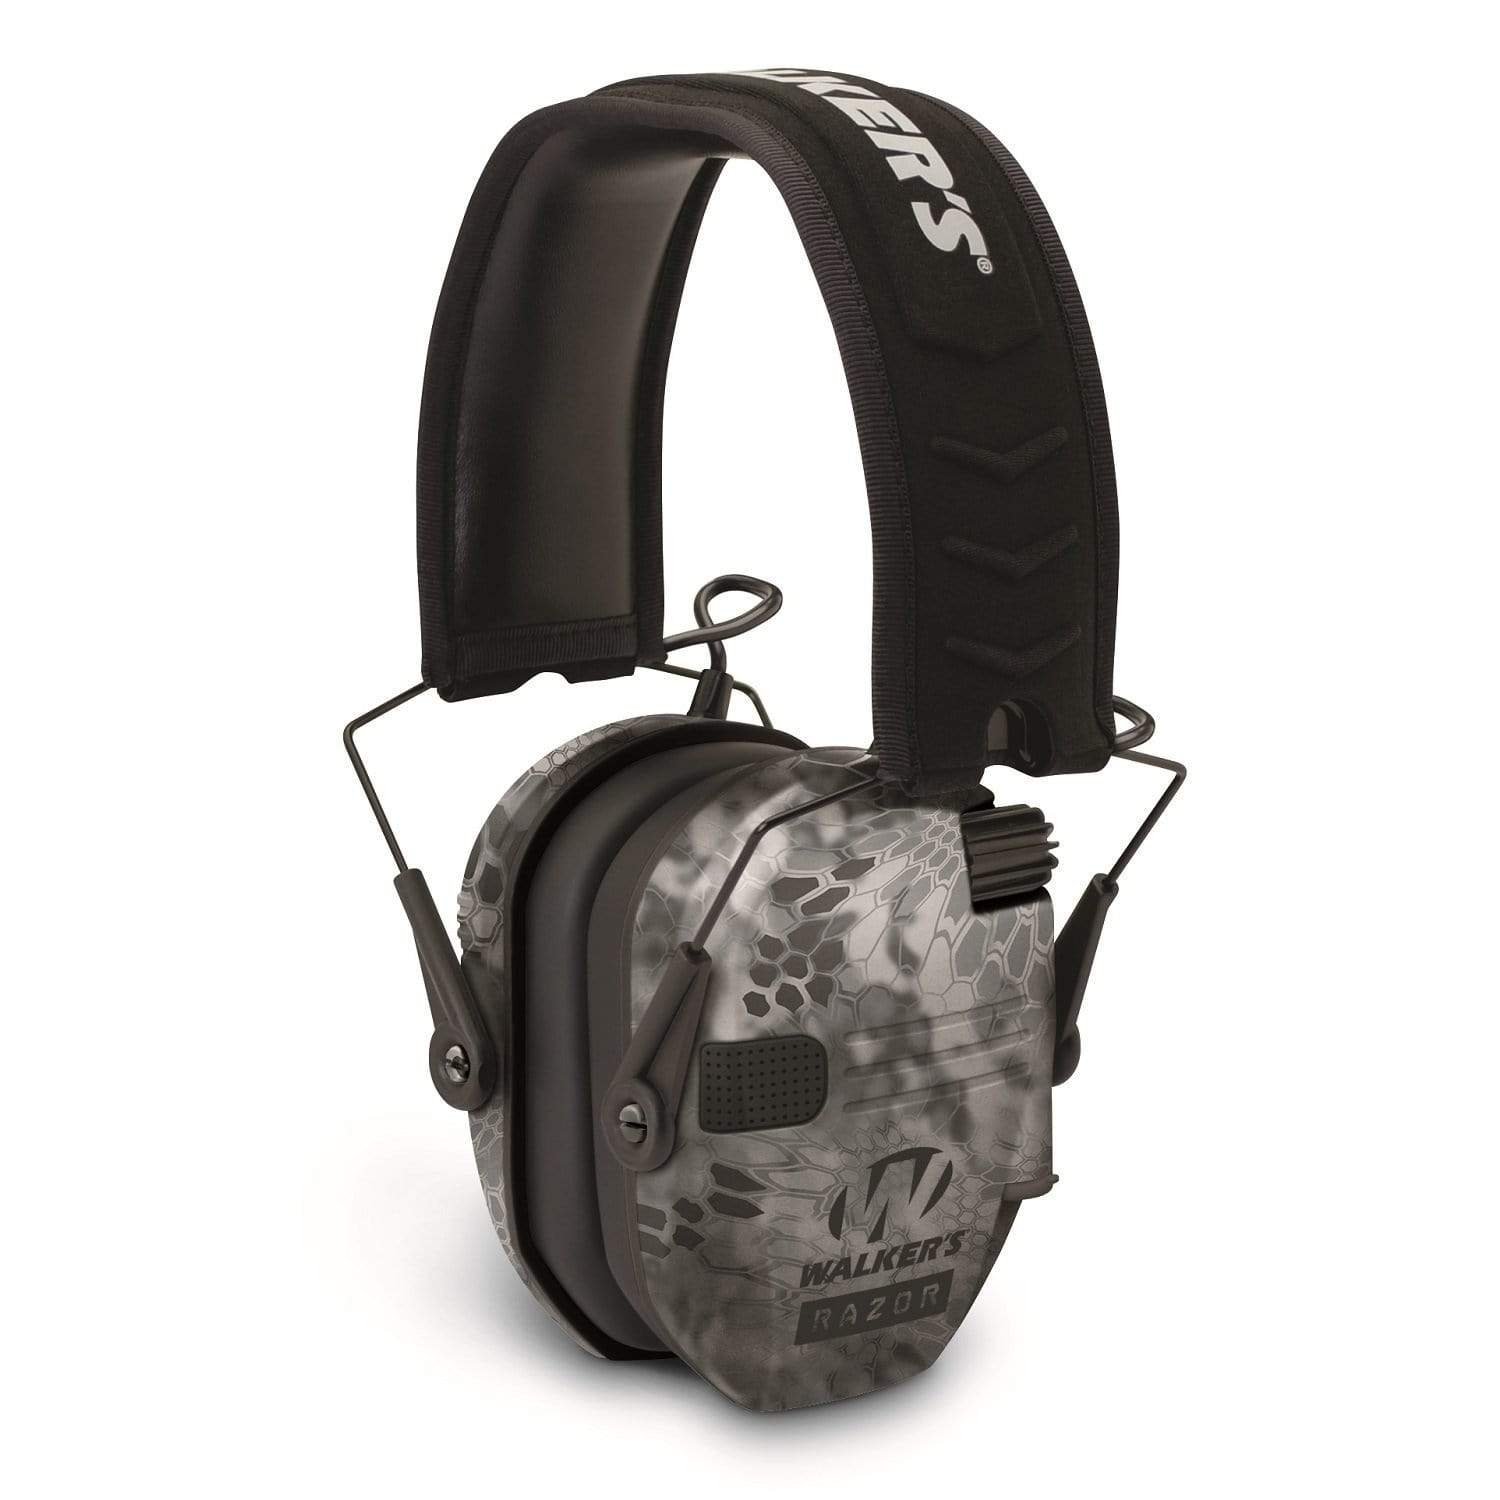 GSM Outdoors Public Safety/L.E. : Hearing Protection Walkers Razor Slim Shooter Folding Muff-23dB NRR-Camo